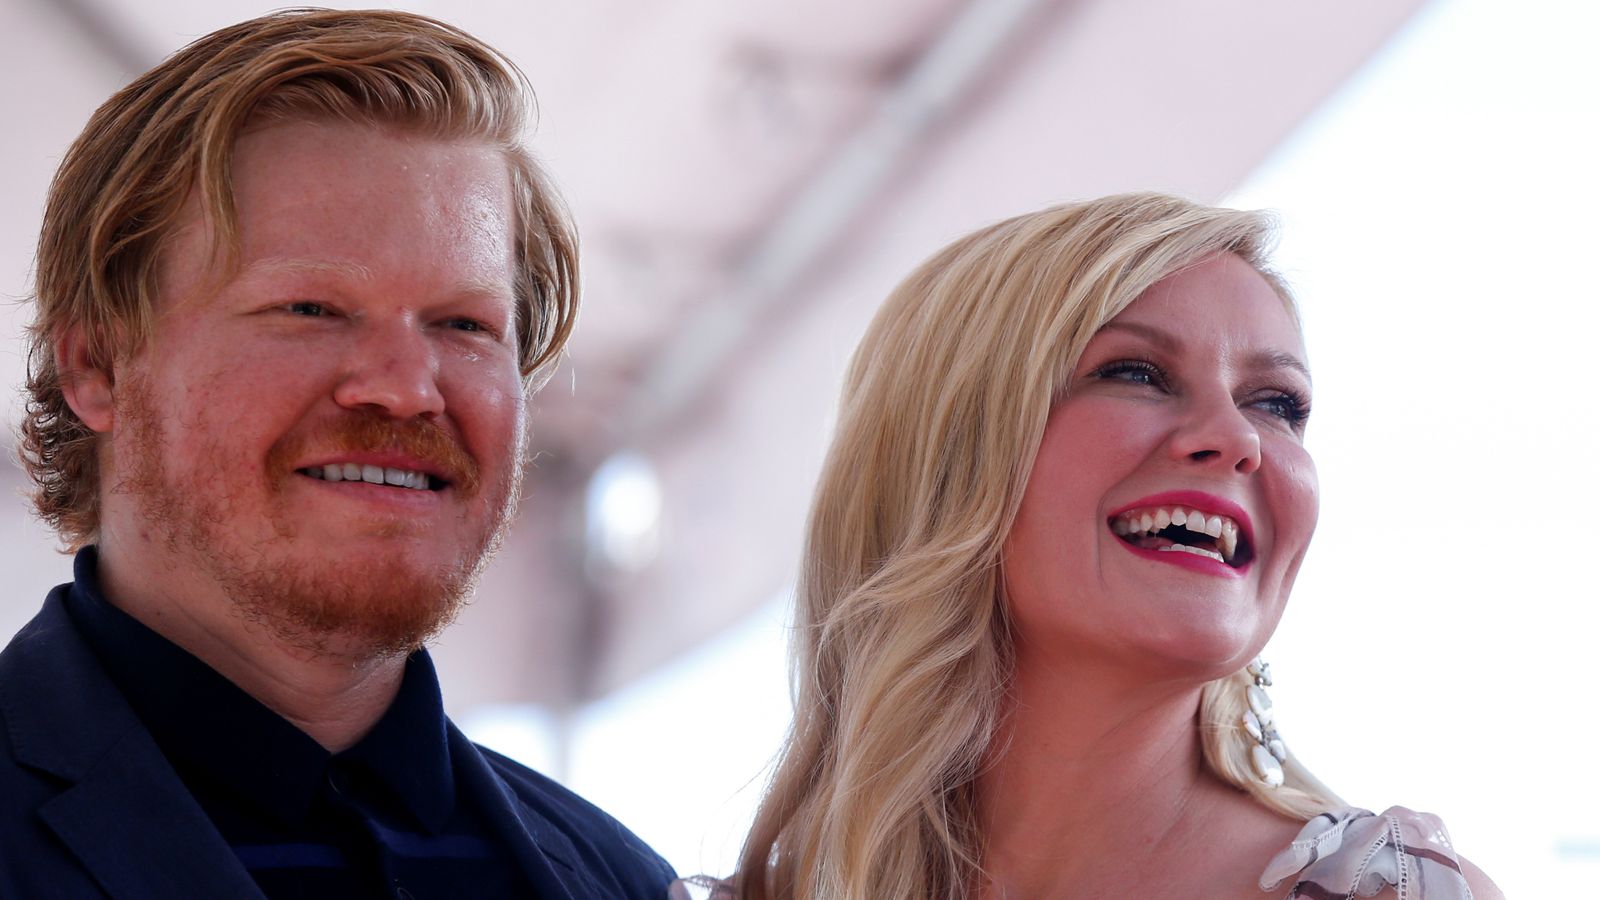 Are Kirsten Dunst And Jesse Plemons Married